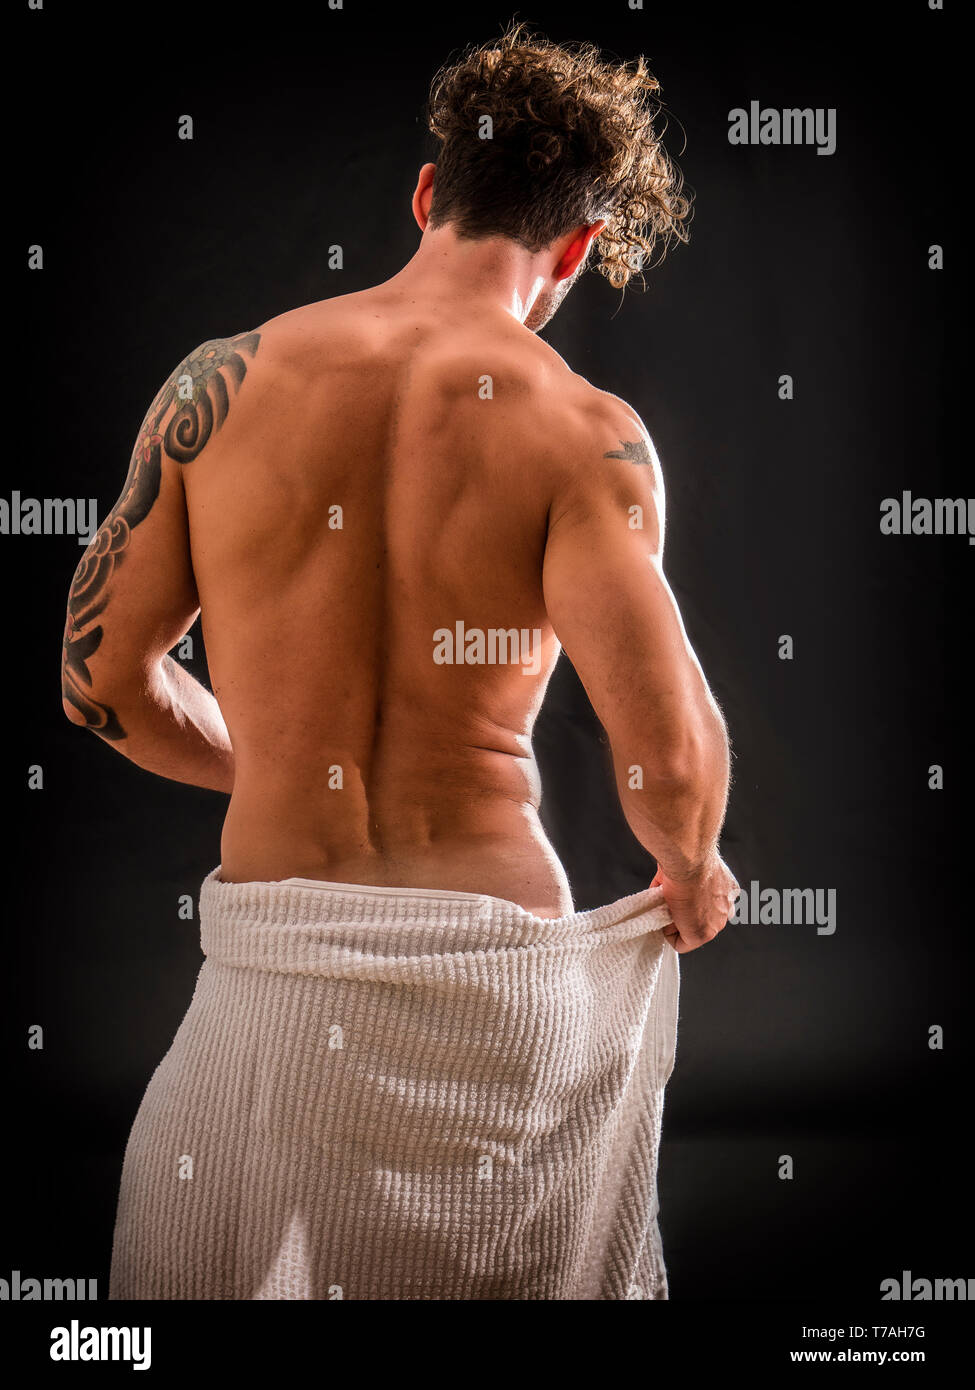 Naked muscular man covering crotch with towel Stock Photo - Alamy